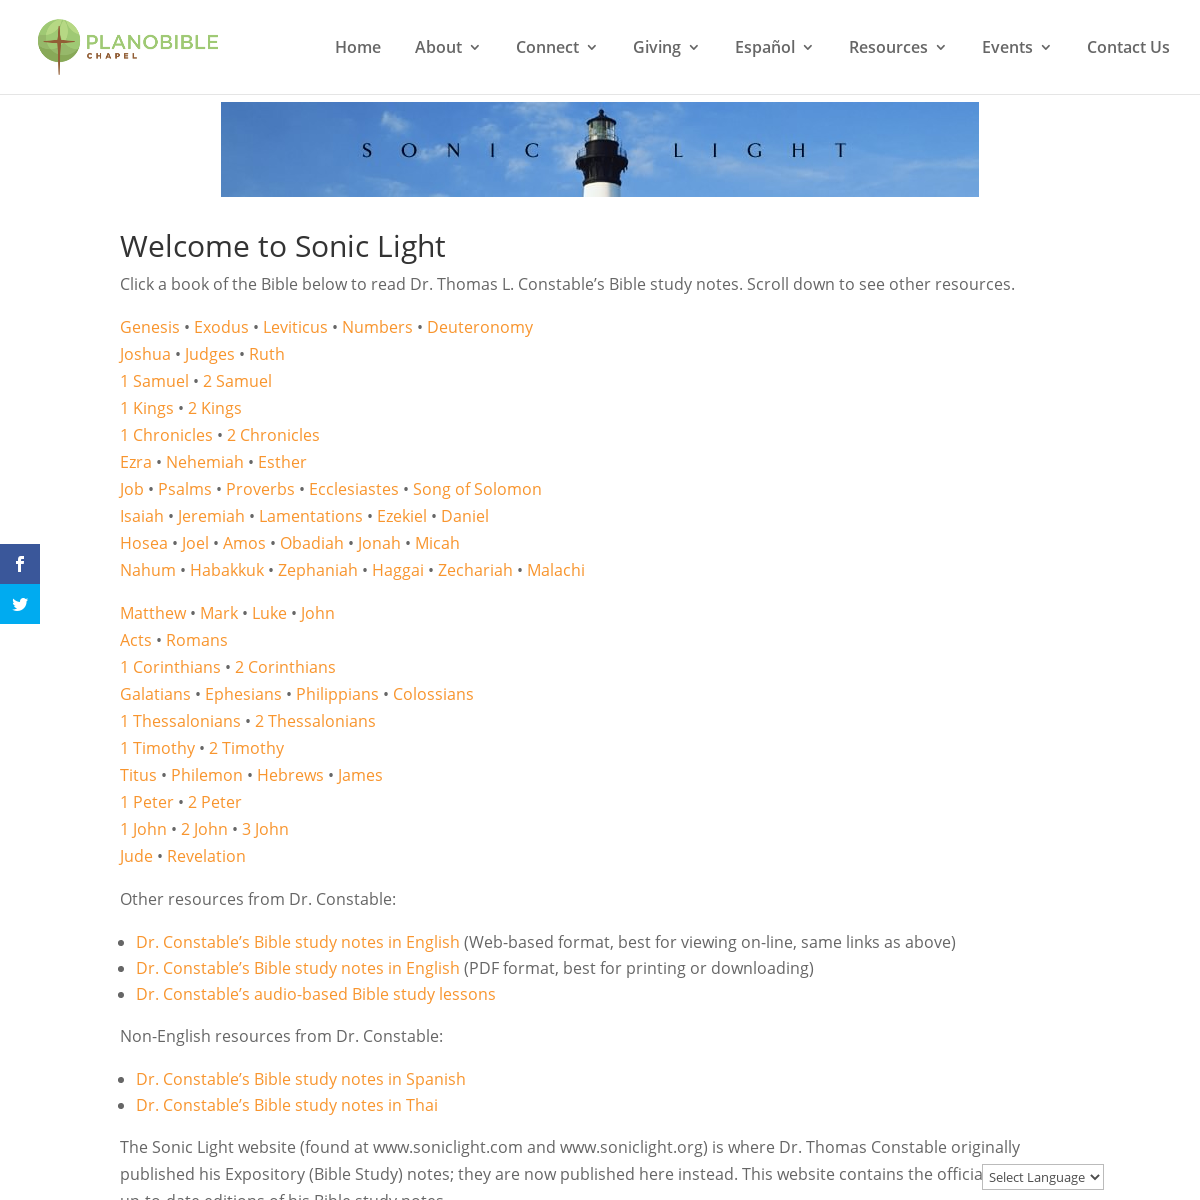 A complete backup of soniclight.com